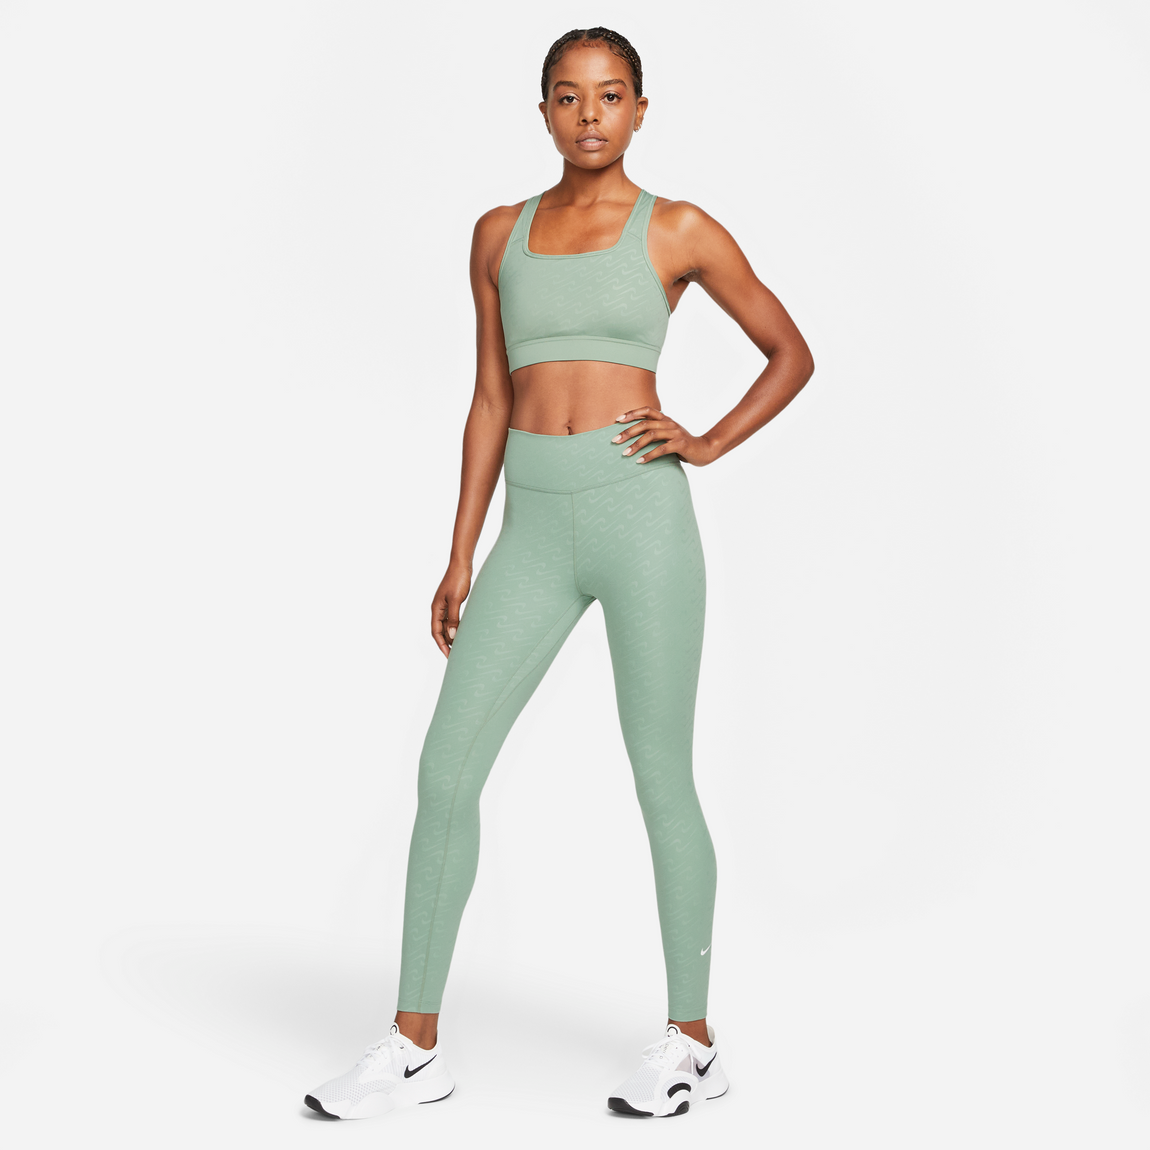 How to select Legging Size, Online shopping Size Guide